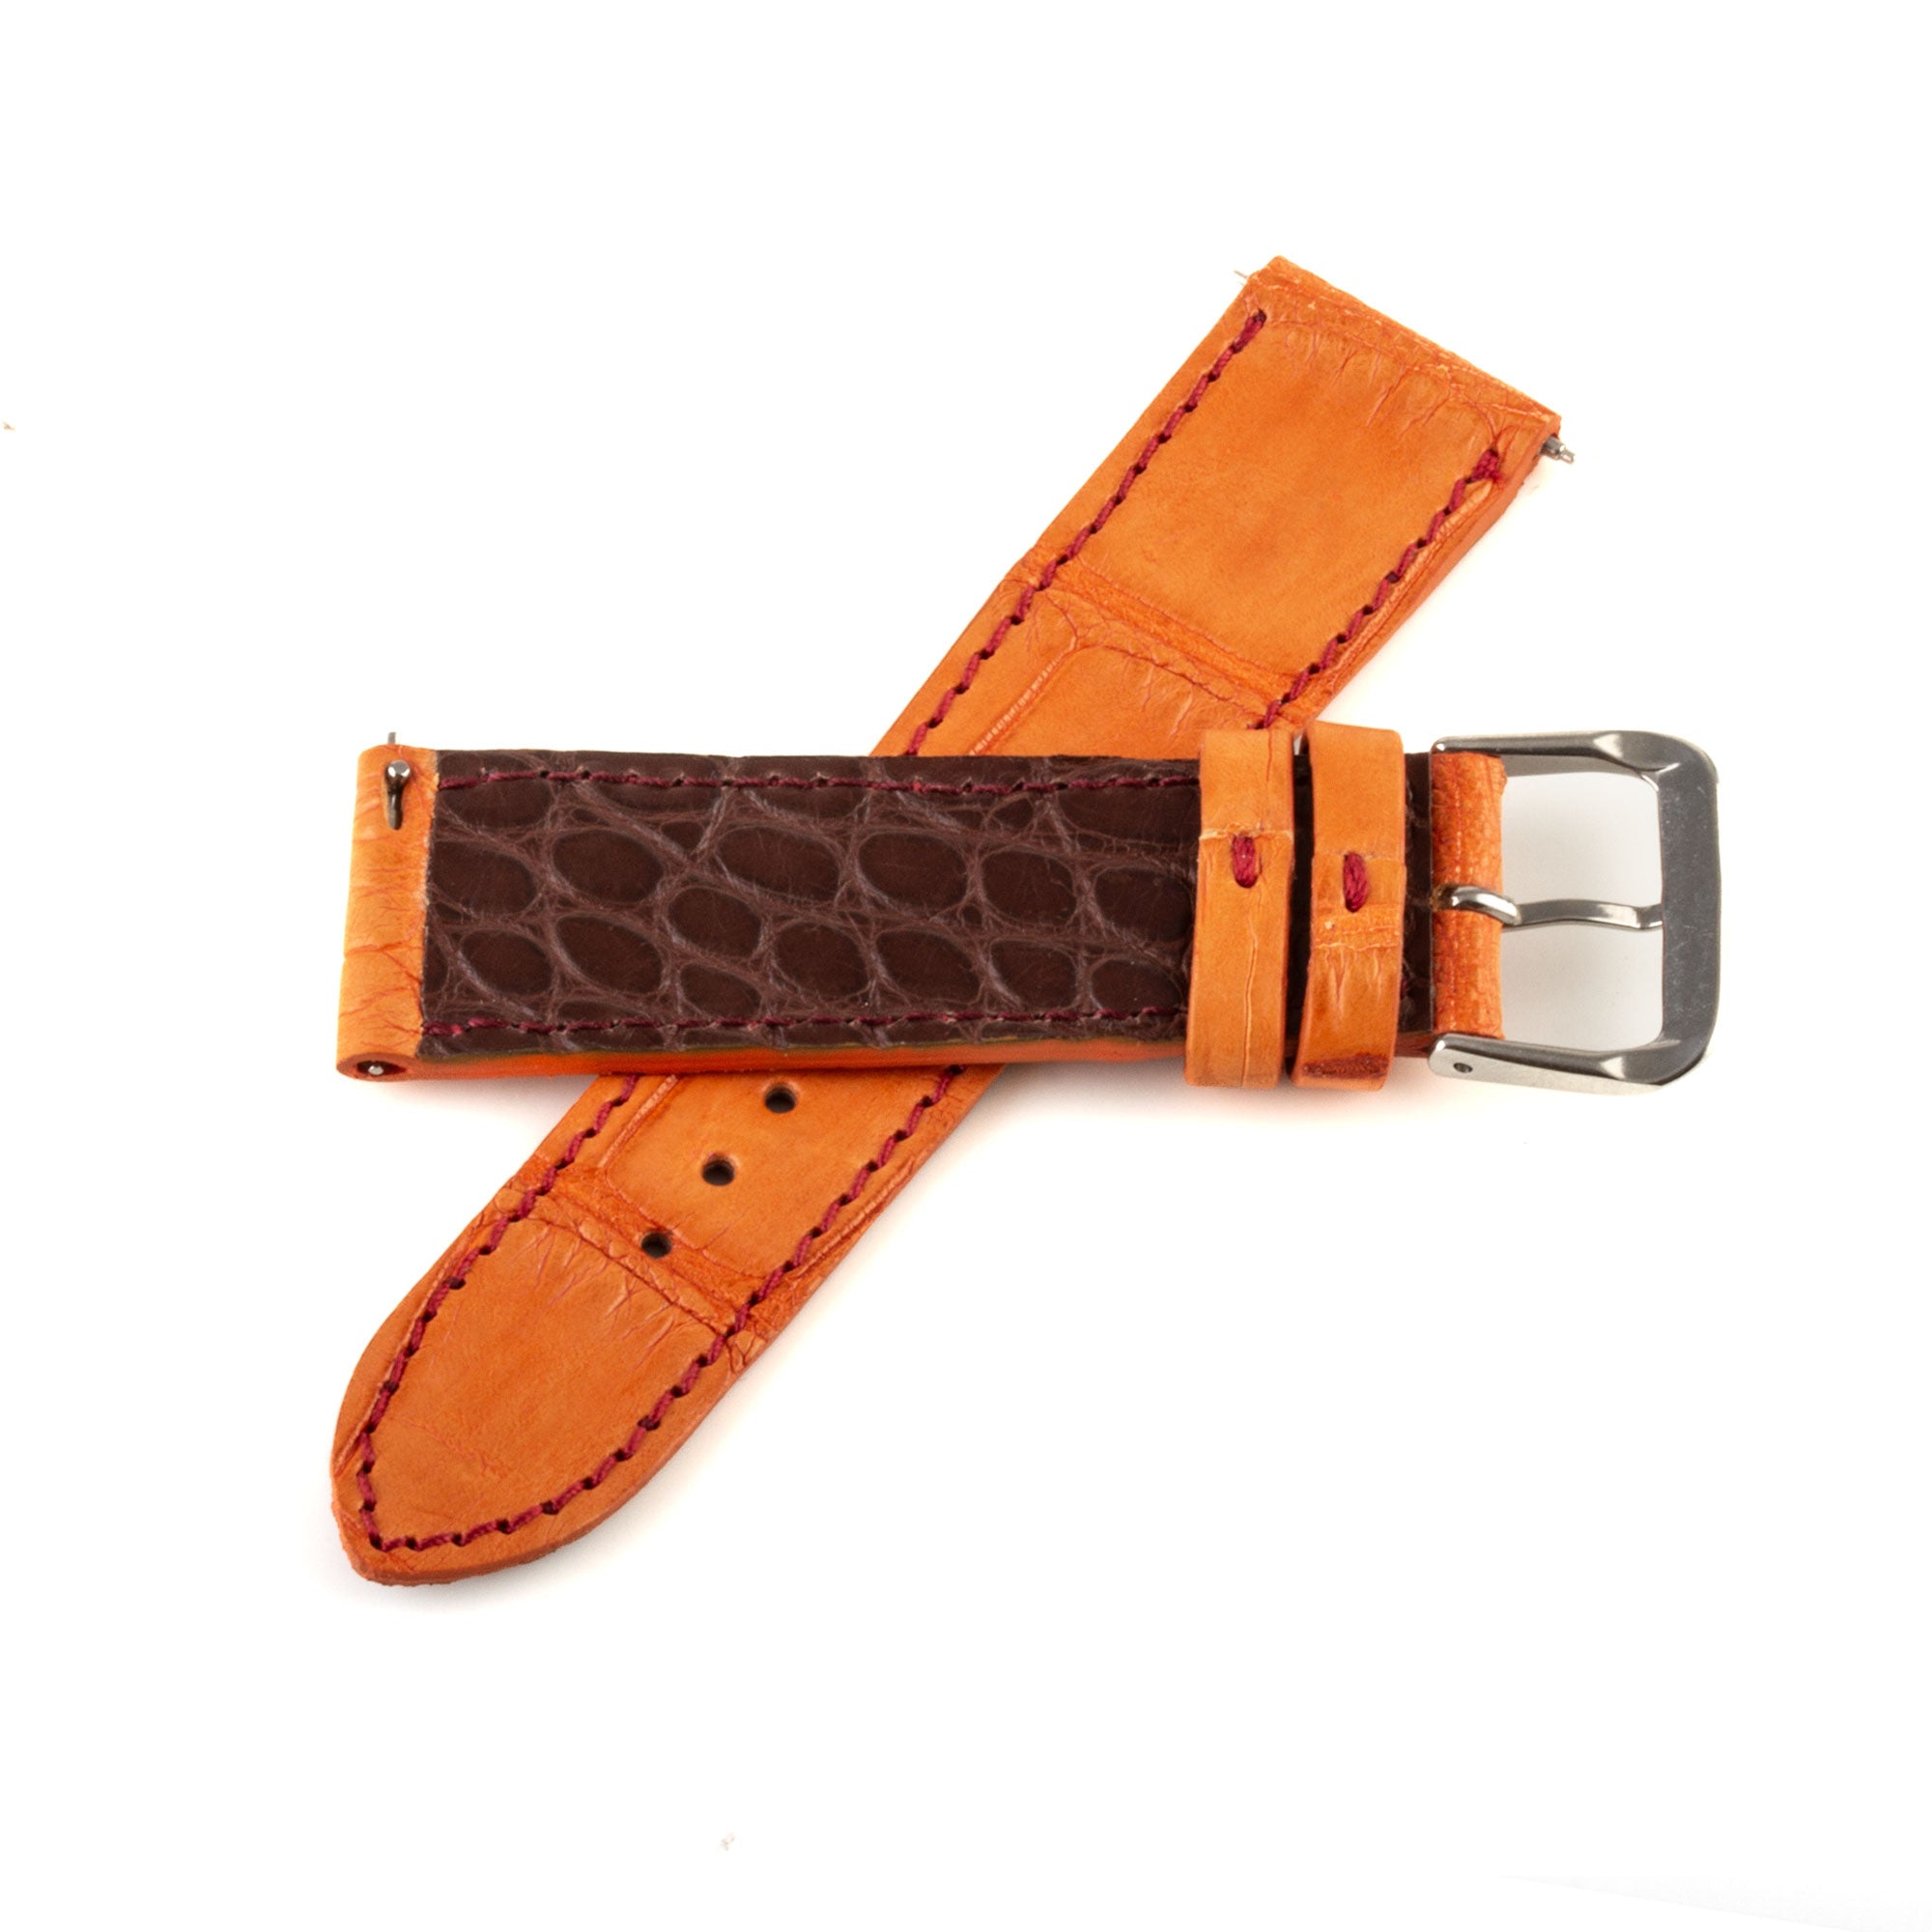 Alligator "Solo" leather watch band - 21mm width (0.83 inches) / Size M (n° 8)